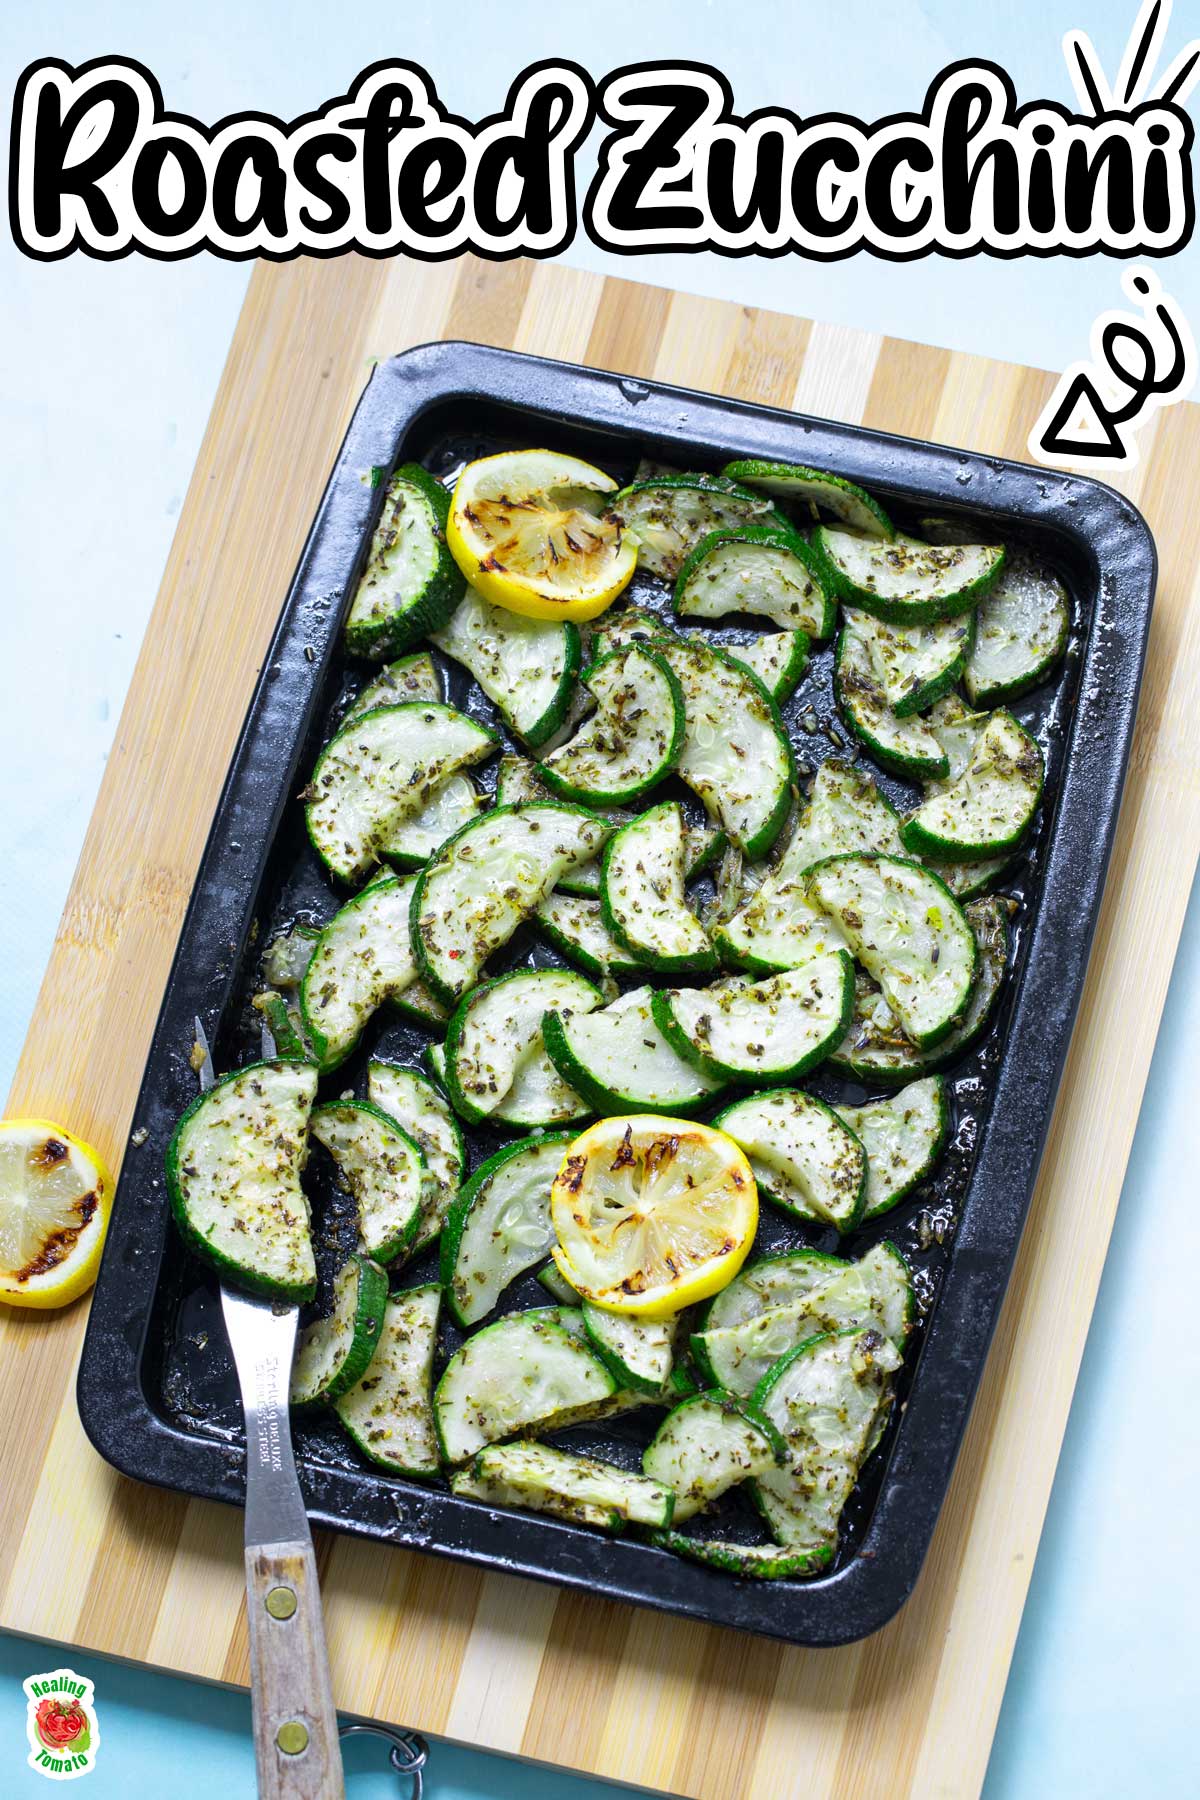 Top view of roasted zucchini in a sheet pan with grilled lemon slices for garnish